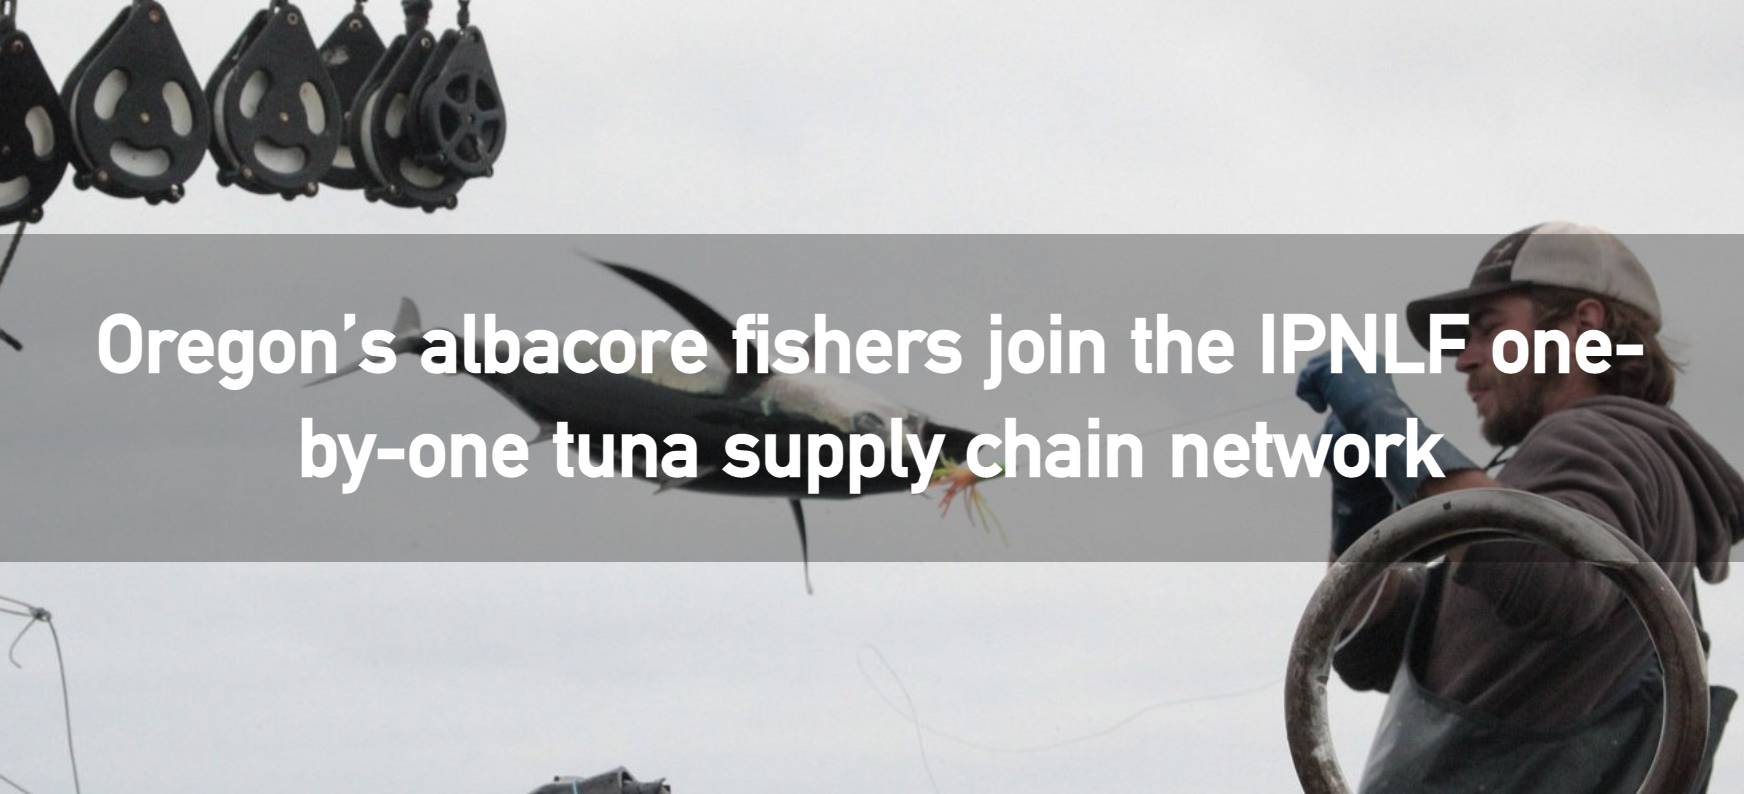 Oregon’s albacore fishers join the IPNLF one-by-one tuna supply chain network